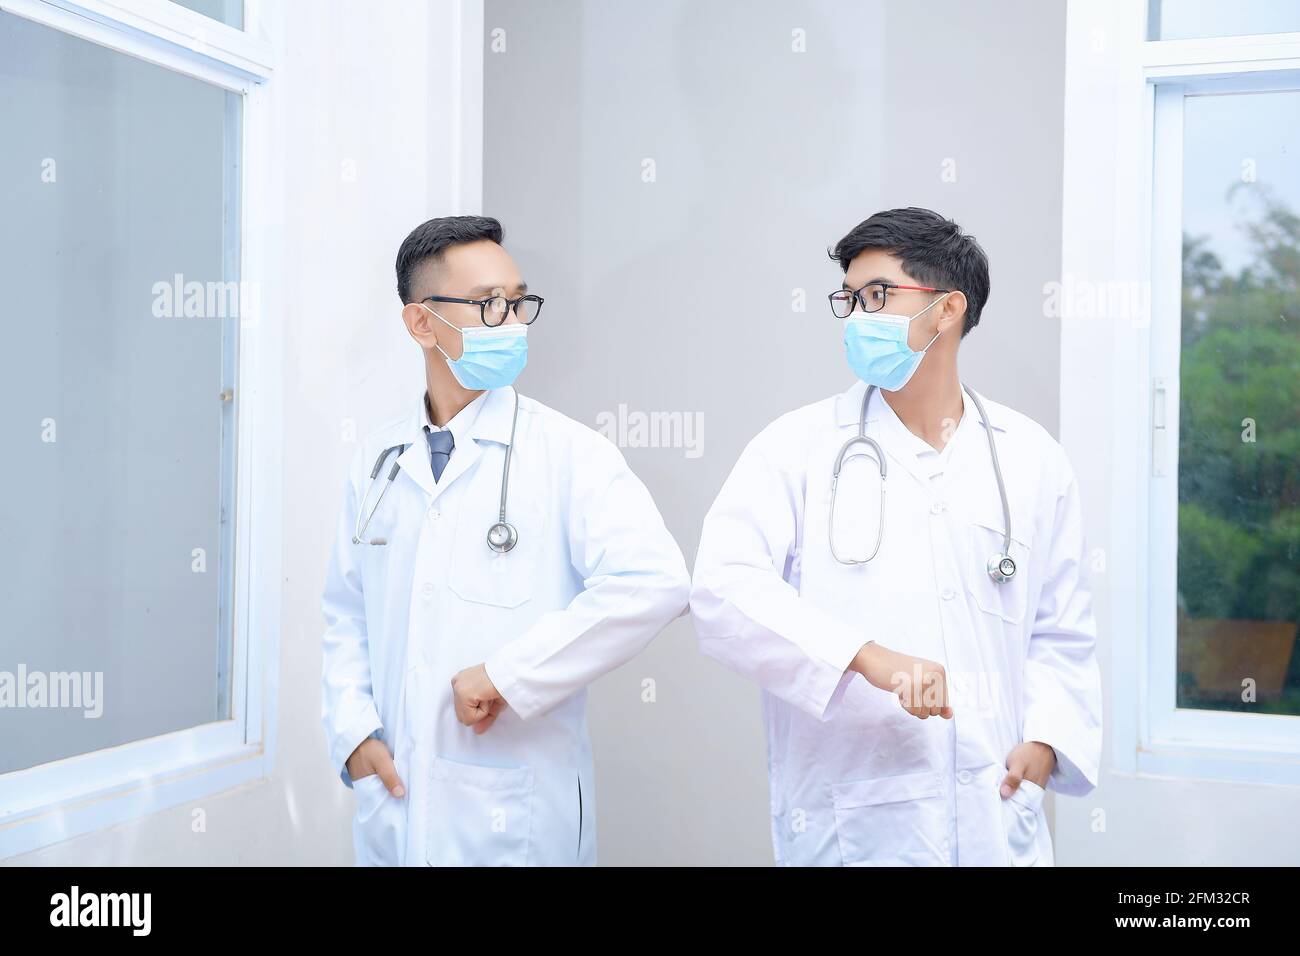 Portrait of two doctors greeting each other by bumping elbows Stock Photo